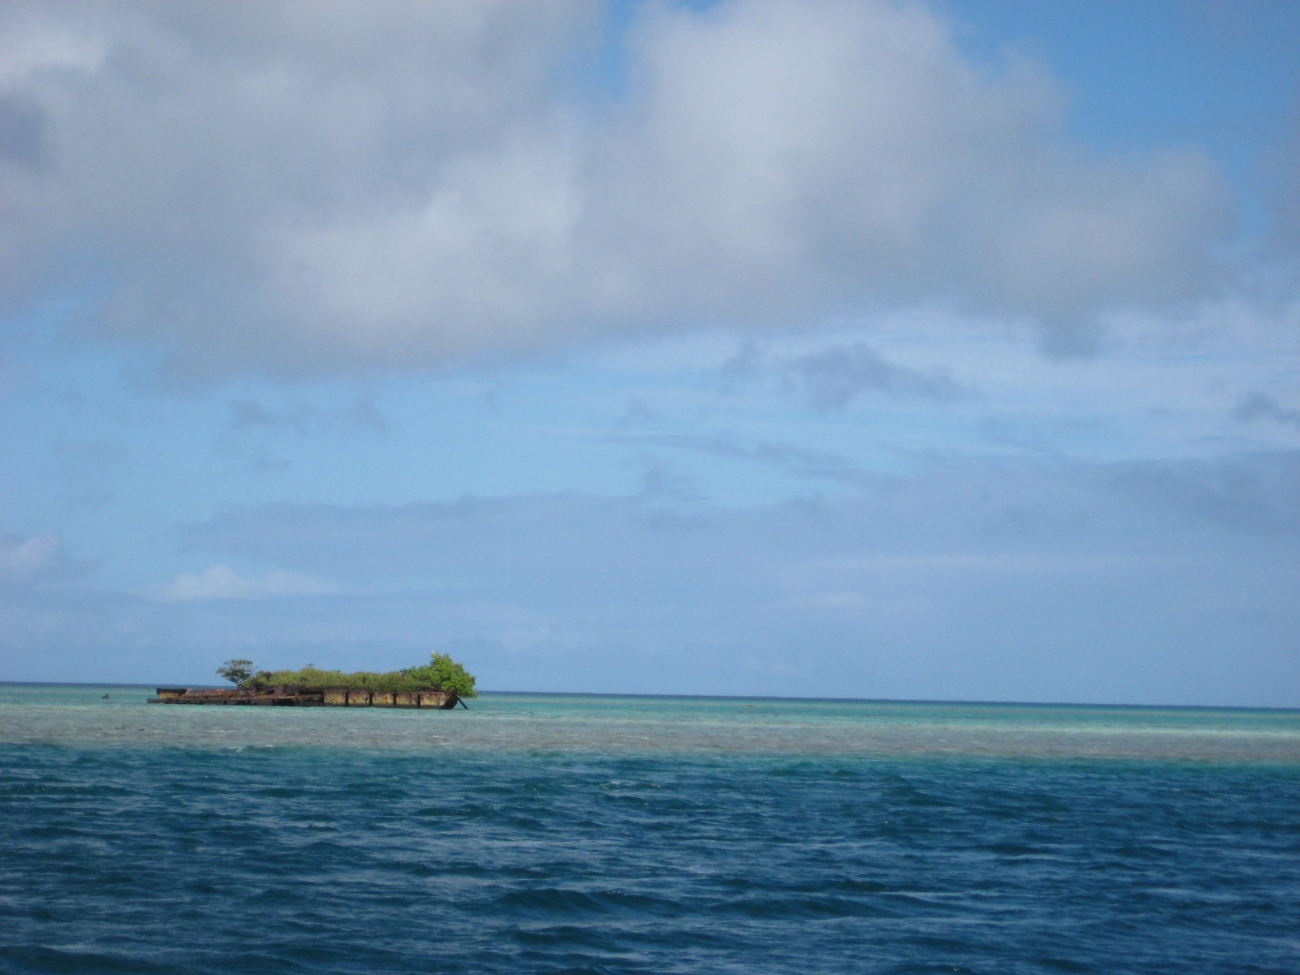 A deserted barge left on the reef which has become a vegetated islet